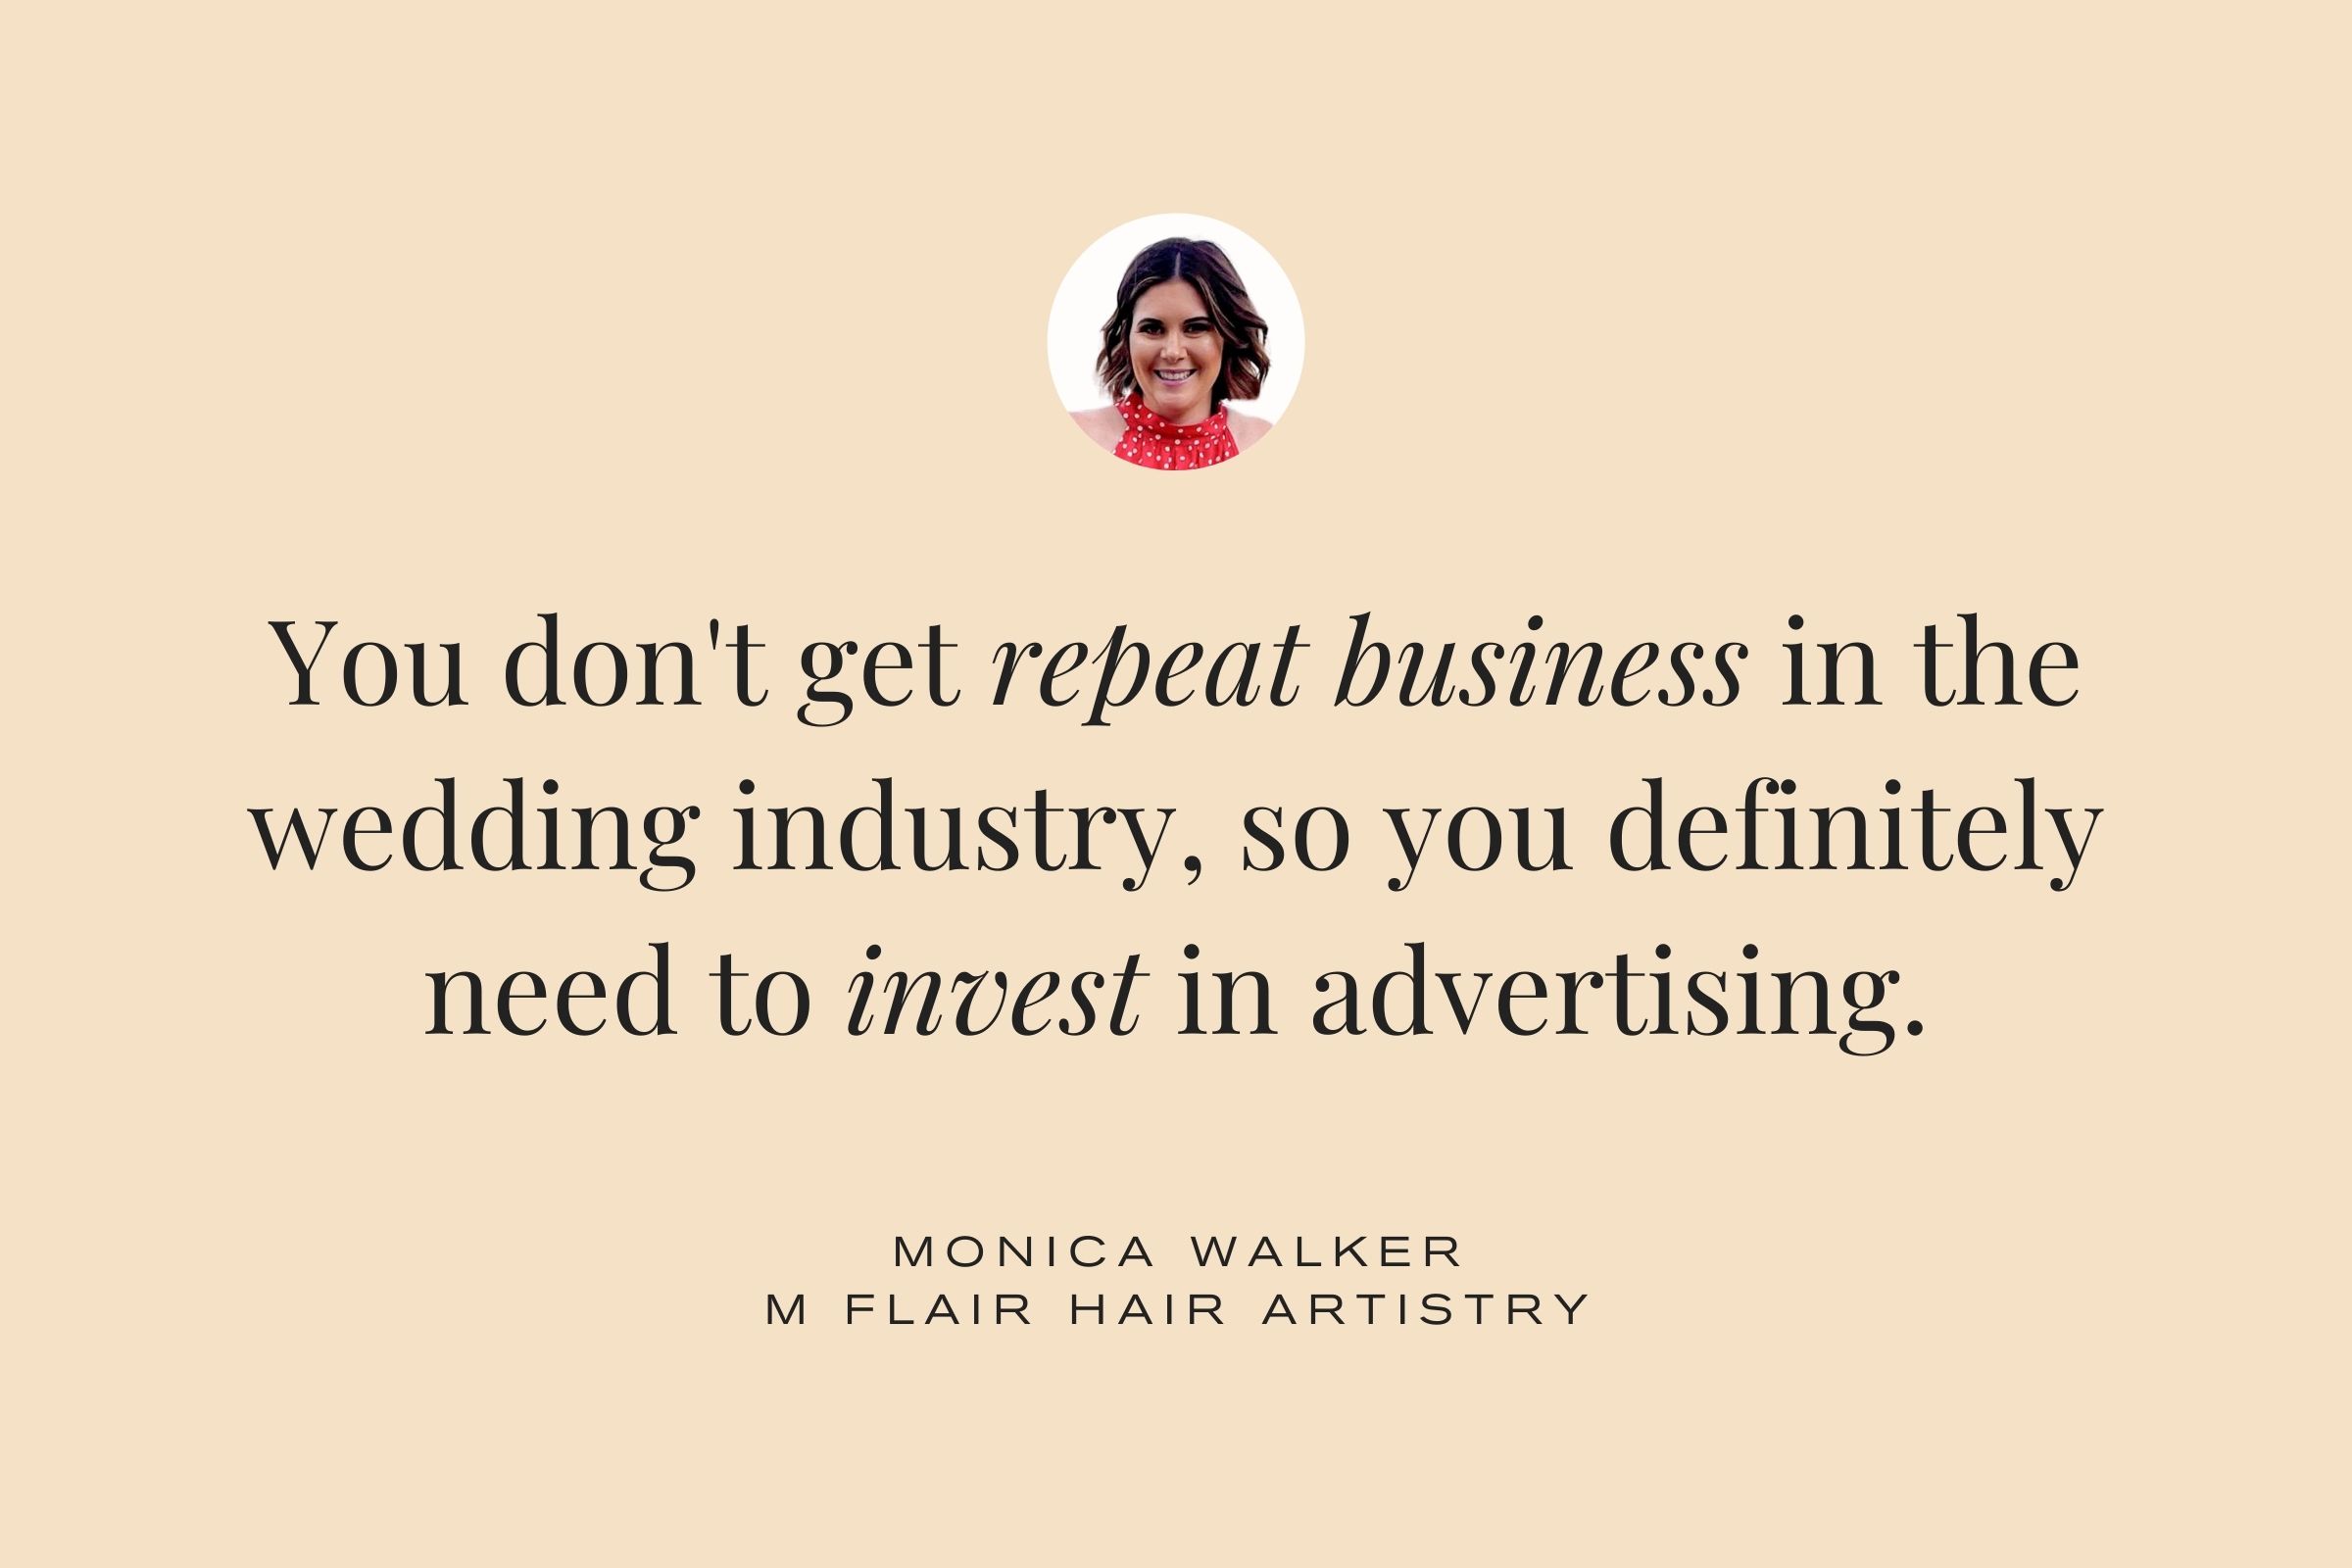 Monica Walker, M Flair Hair Artistry: You don't get repeat business in the wedding industry, so you definitely need to invest in advertising.